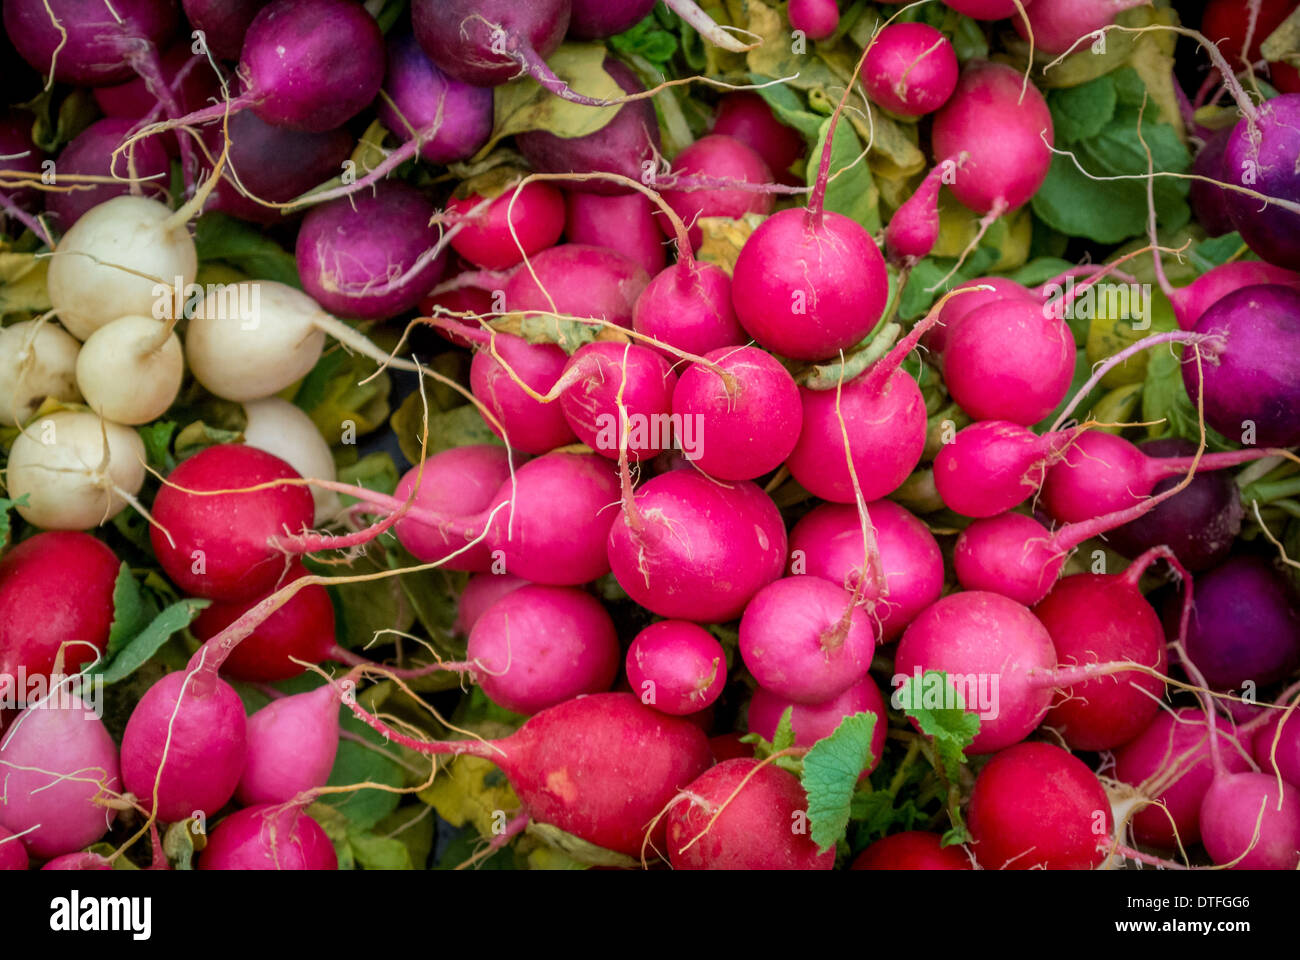 Pink, purple, red and white radishes. Stock Photo